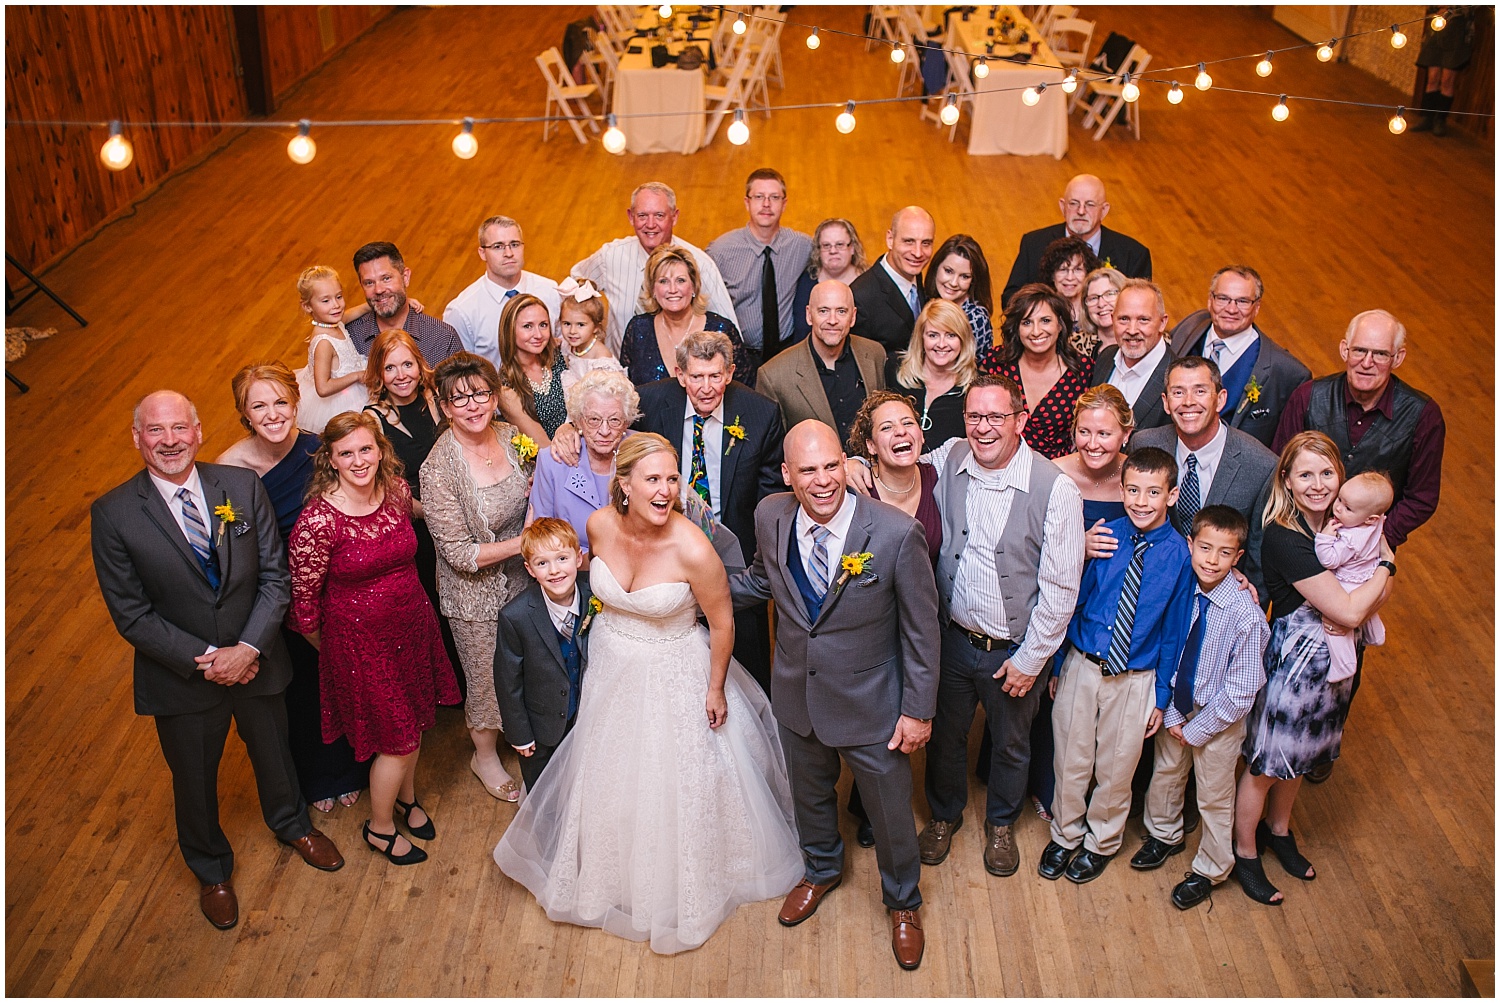 Big group photo of all the guests at Rustic Lace Barn wedding